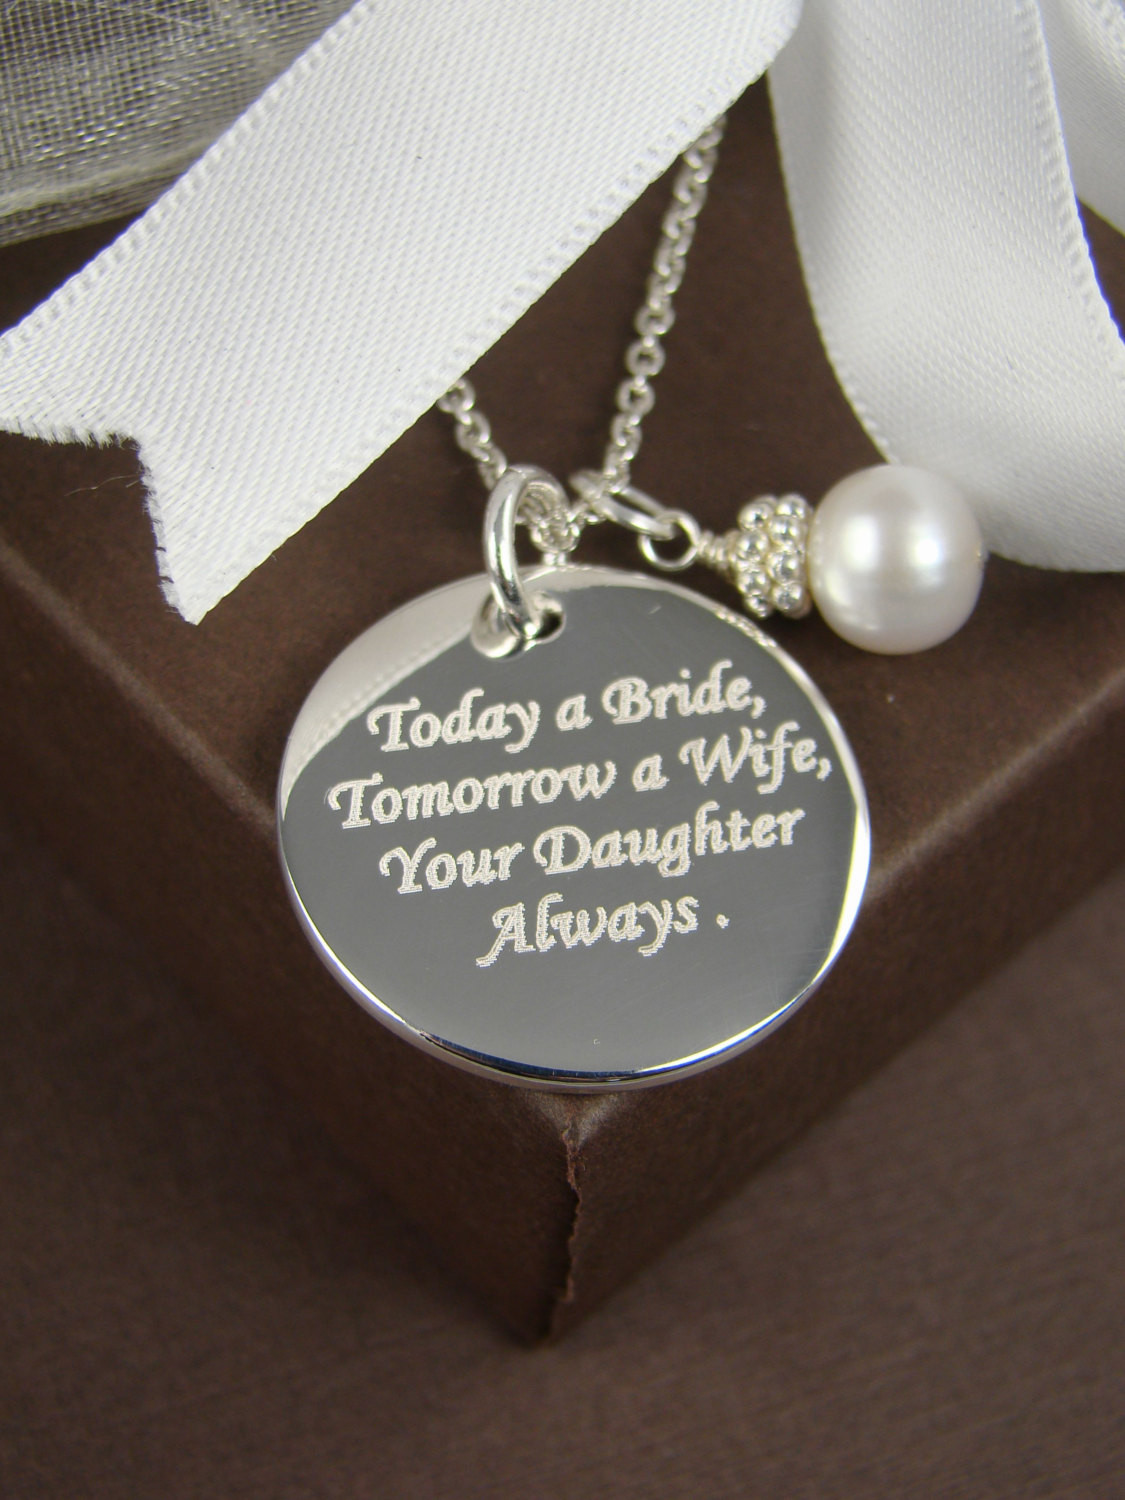 Unique Mother Of The Bride Gift Ideas
 Wedding Gift for Mother of the Bride Personalized Engraved